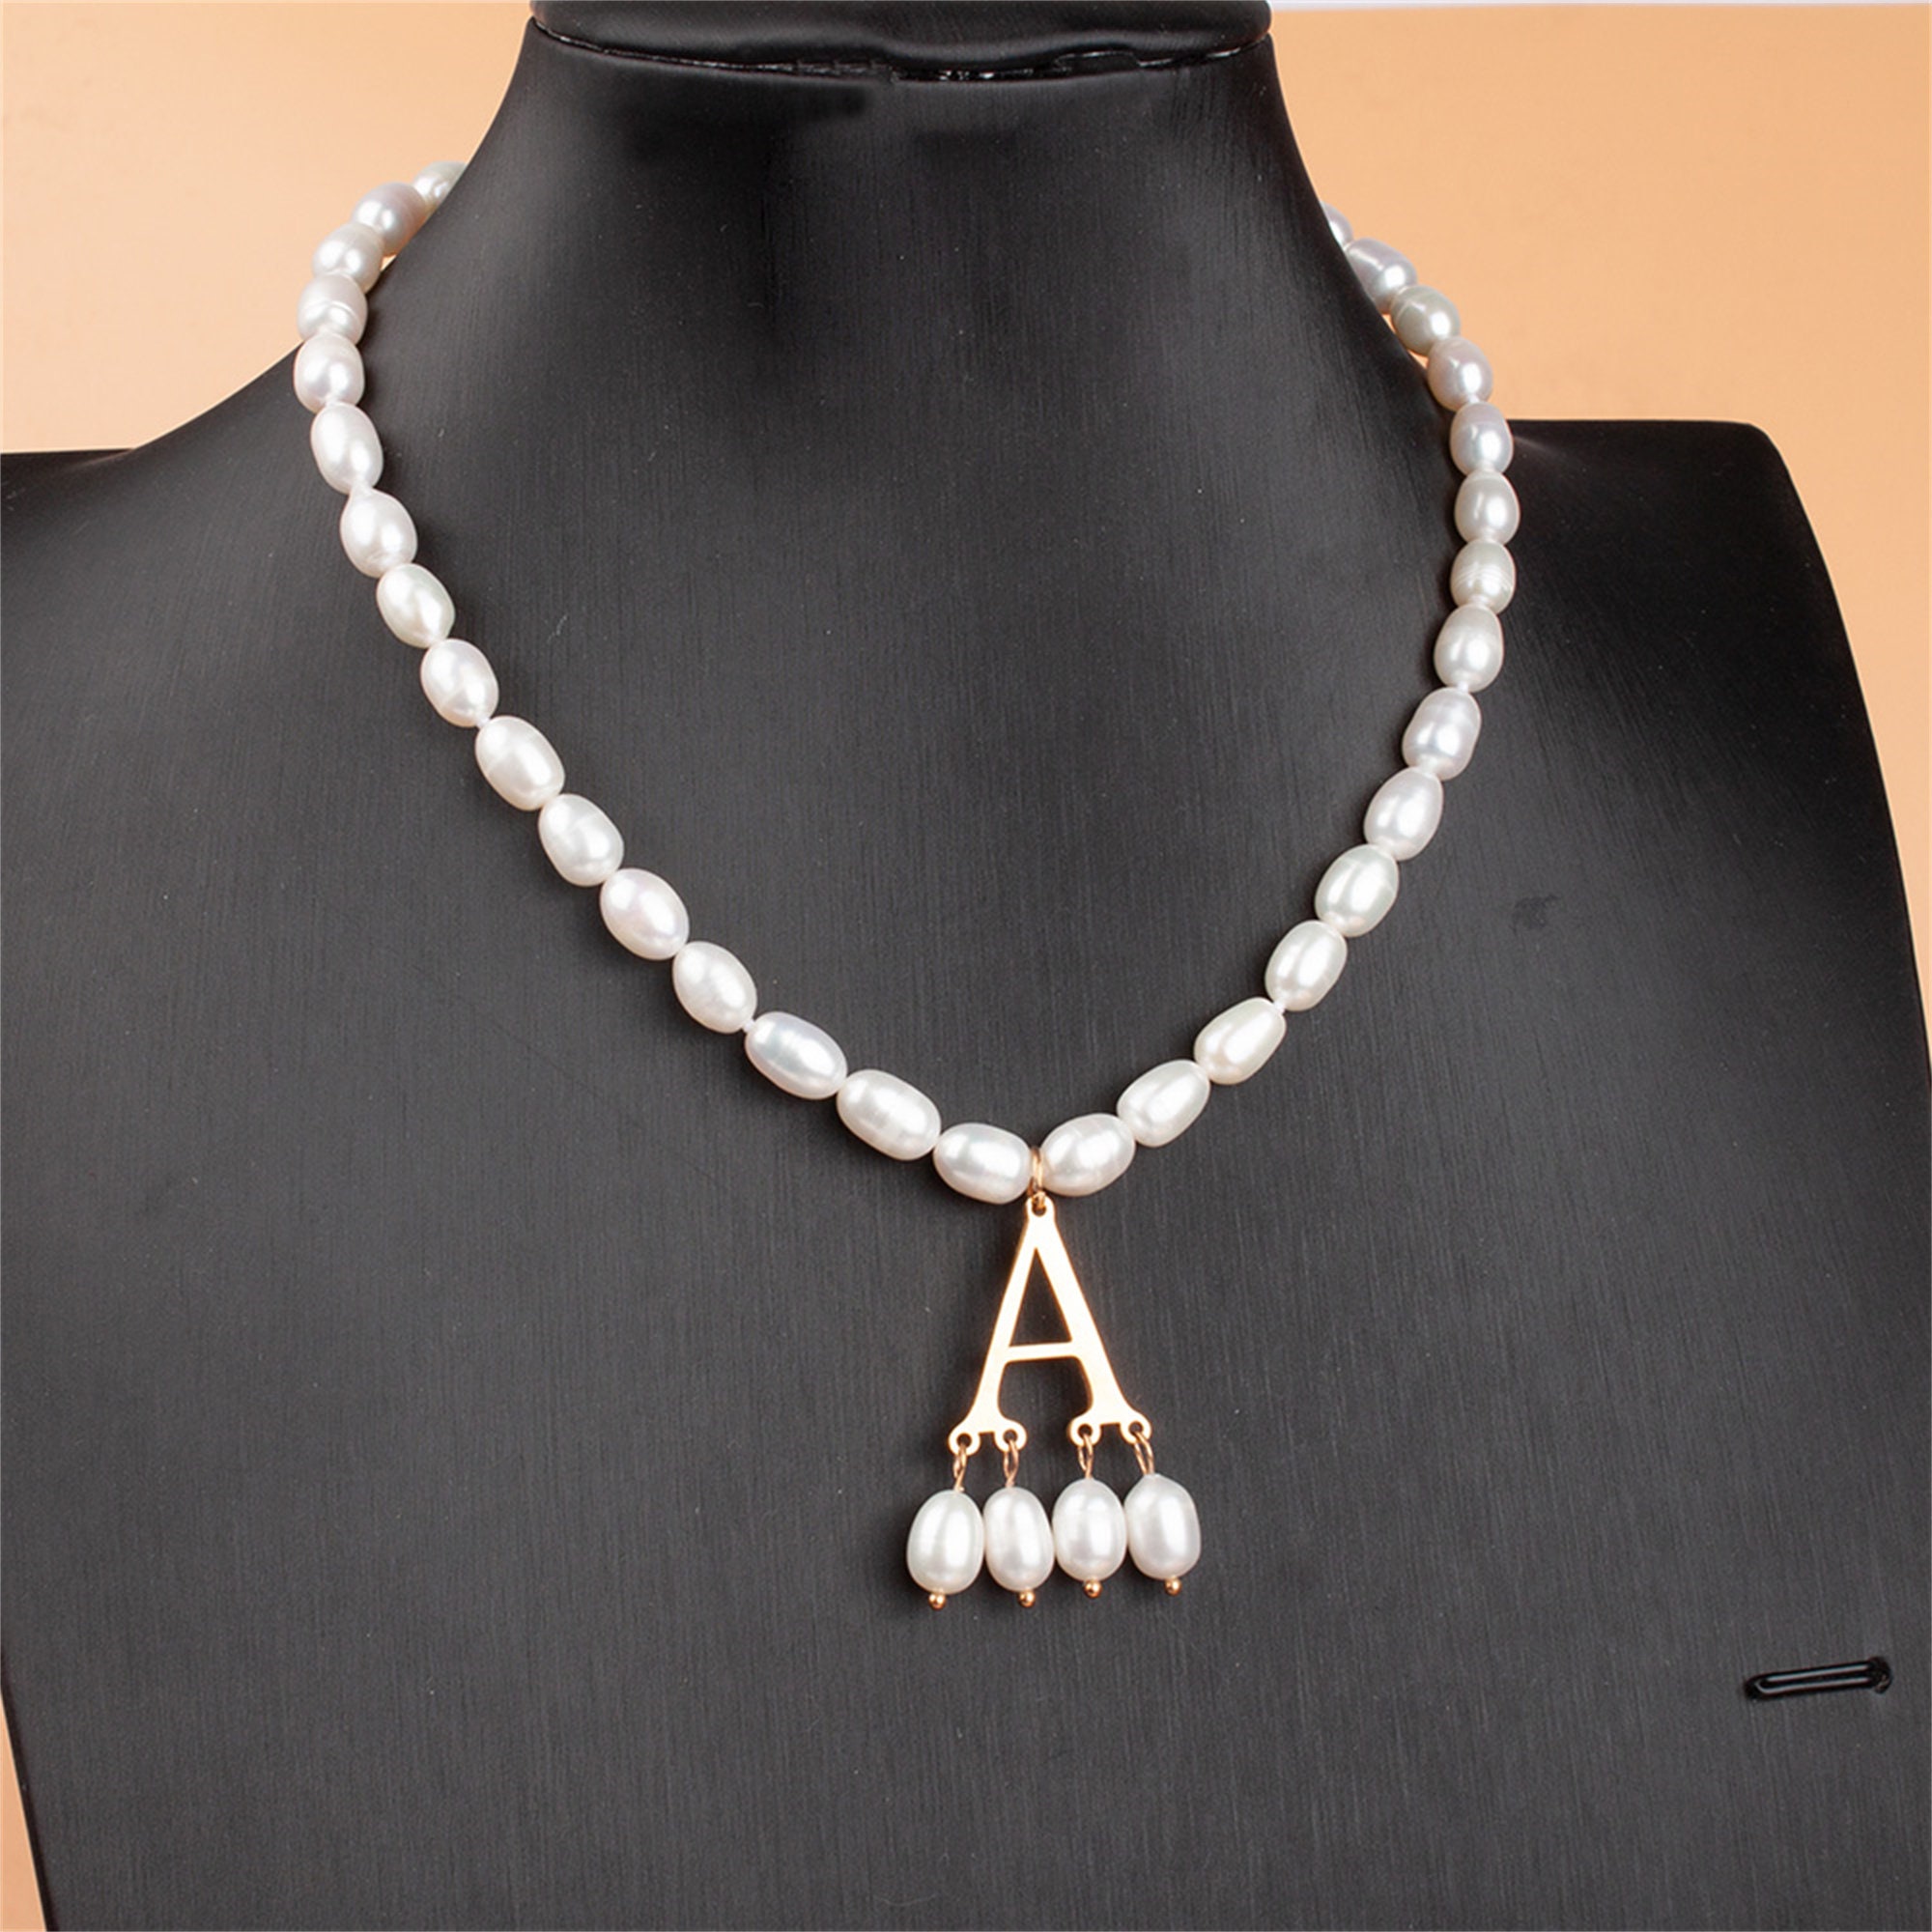 Anne Boleyn Style Monogram Necklace with Pearls — Bang-Up Betty